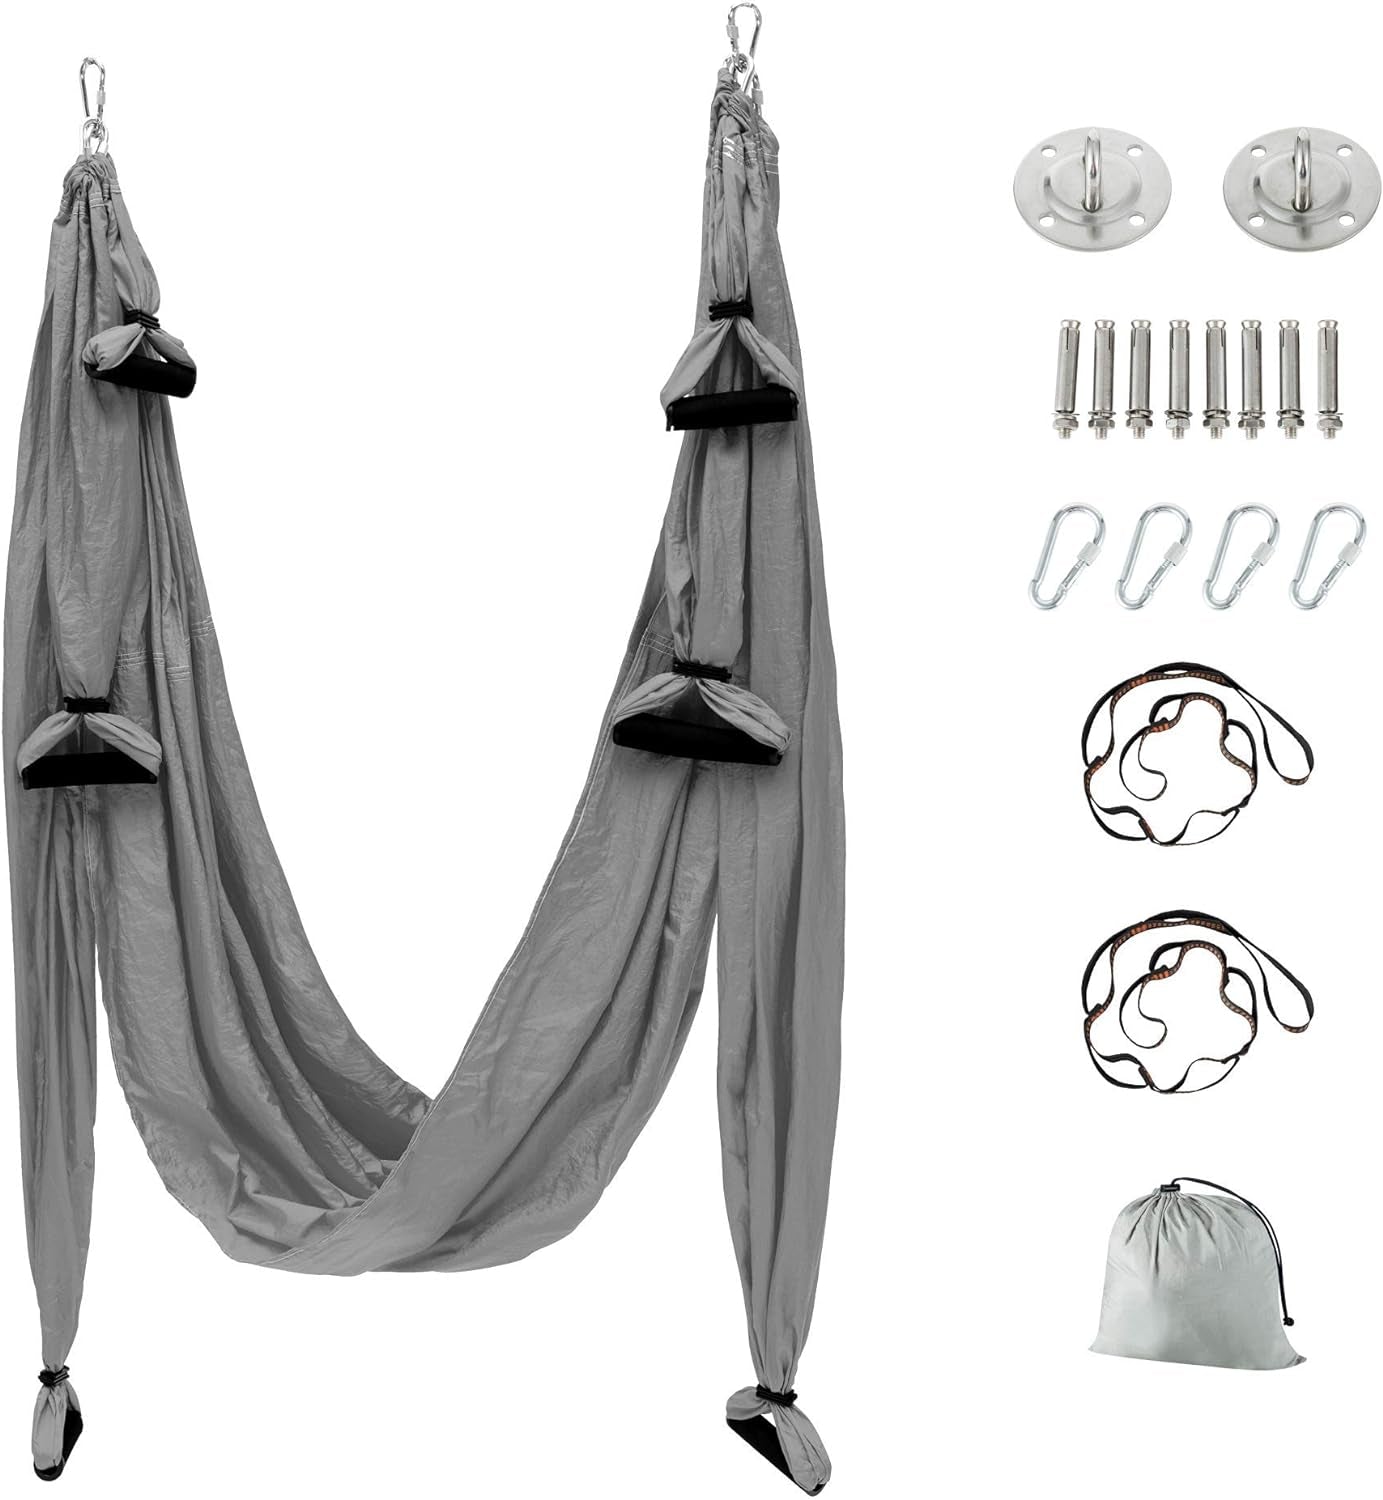 " Aerial Yoga Swing Hammock: Enhance Your Gym and Home Fitness Routine with this Flying Yoga Trapeze Sling and Inversion Tool"